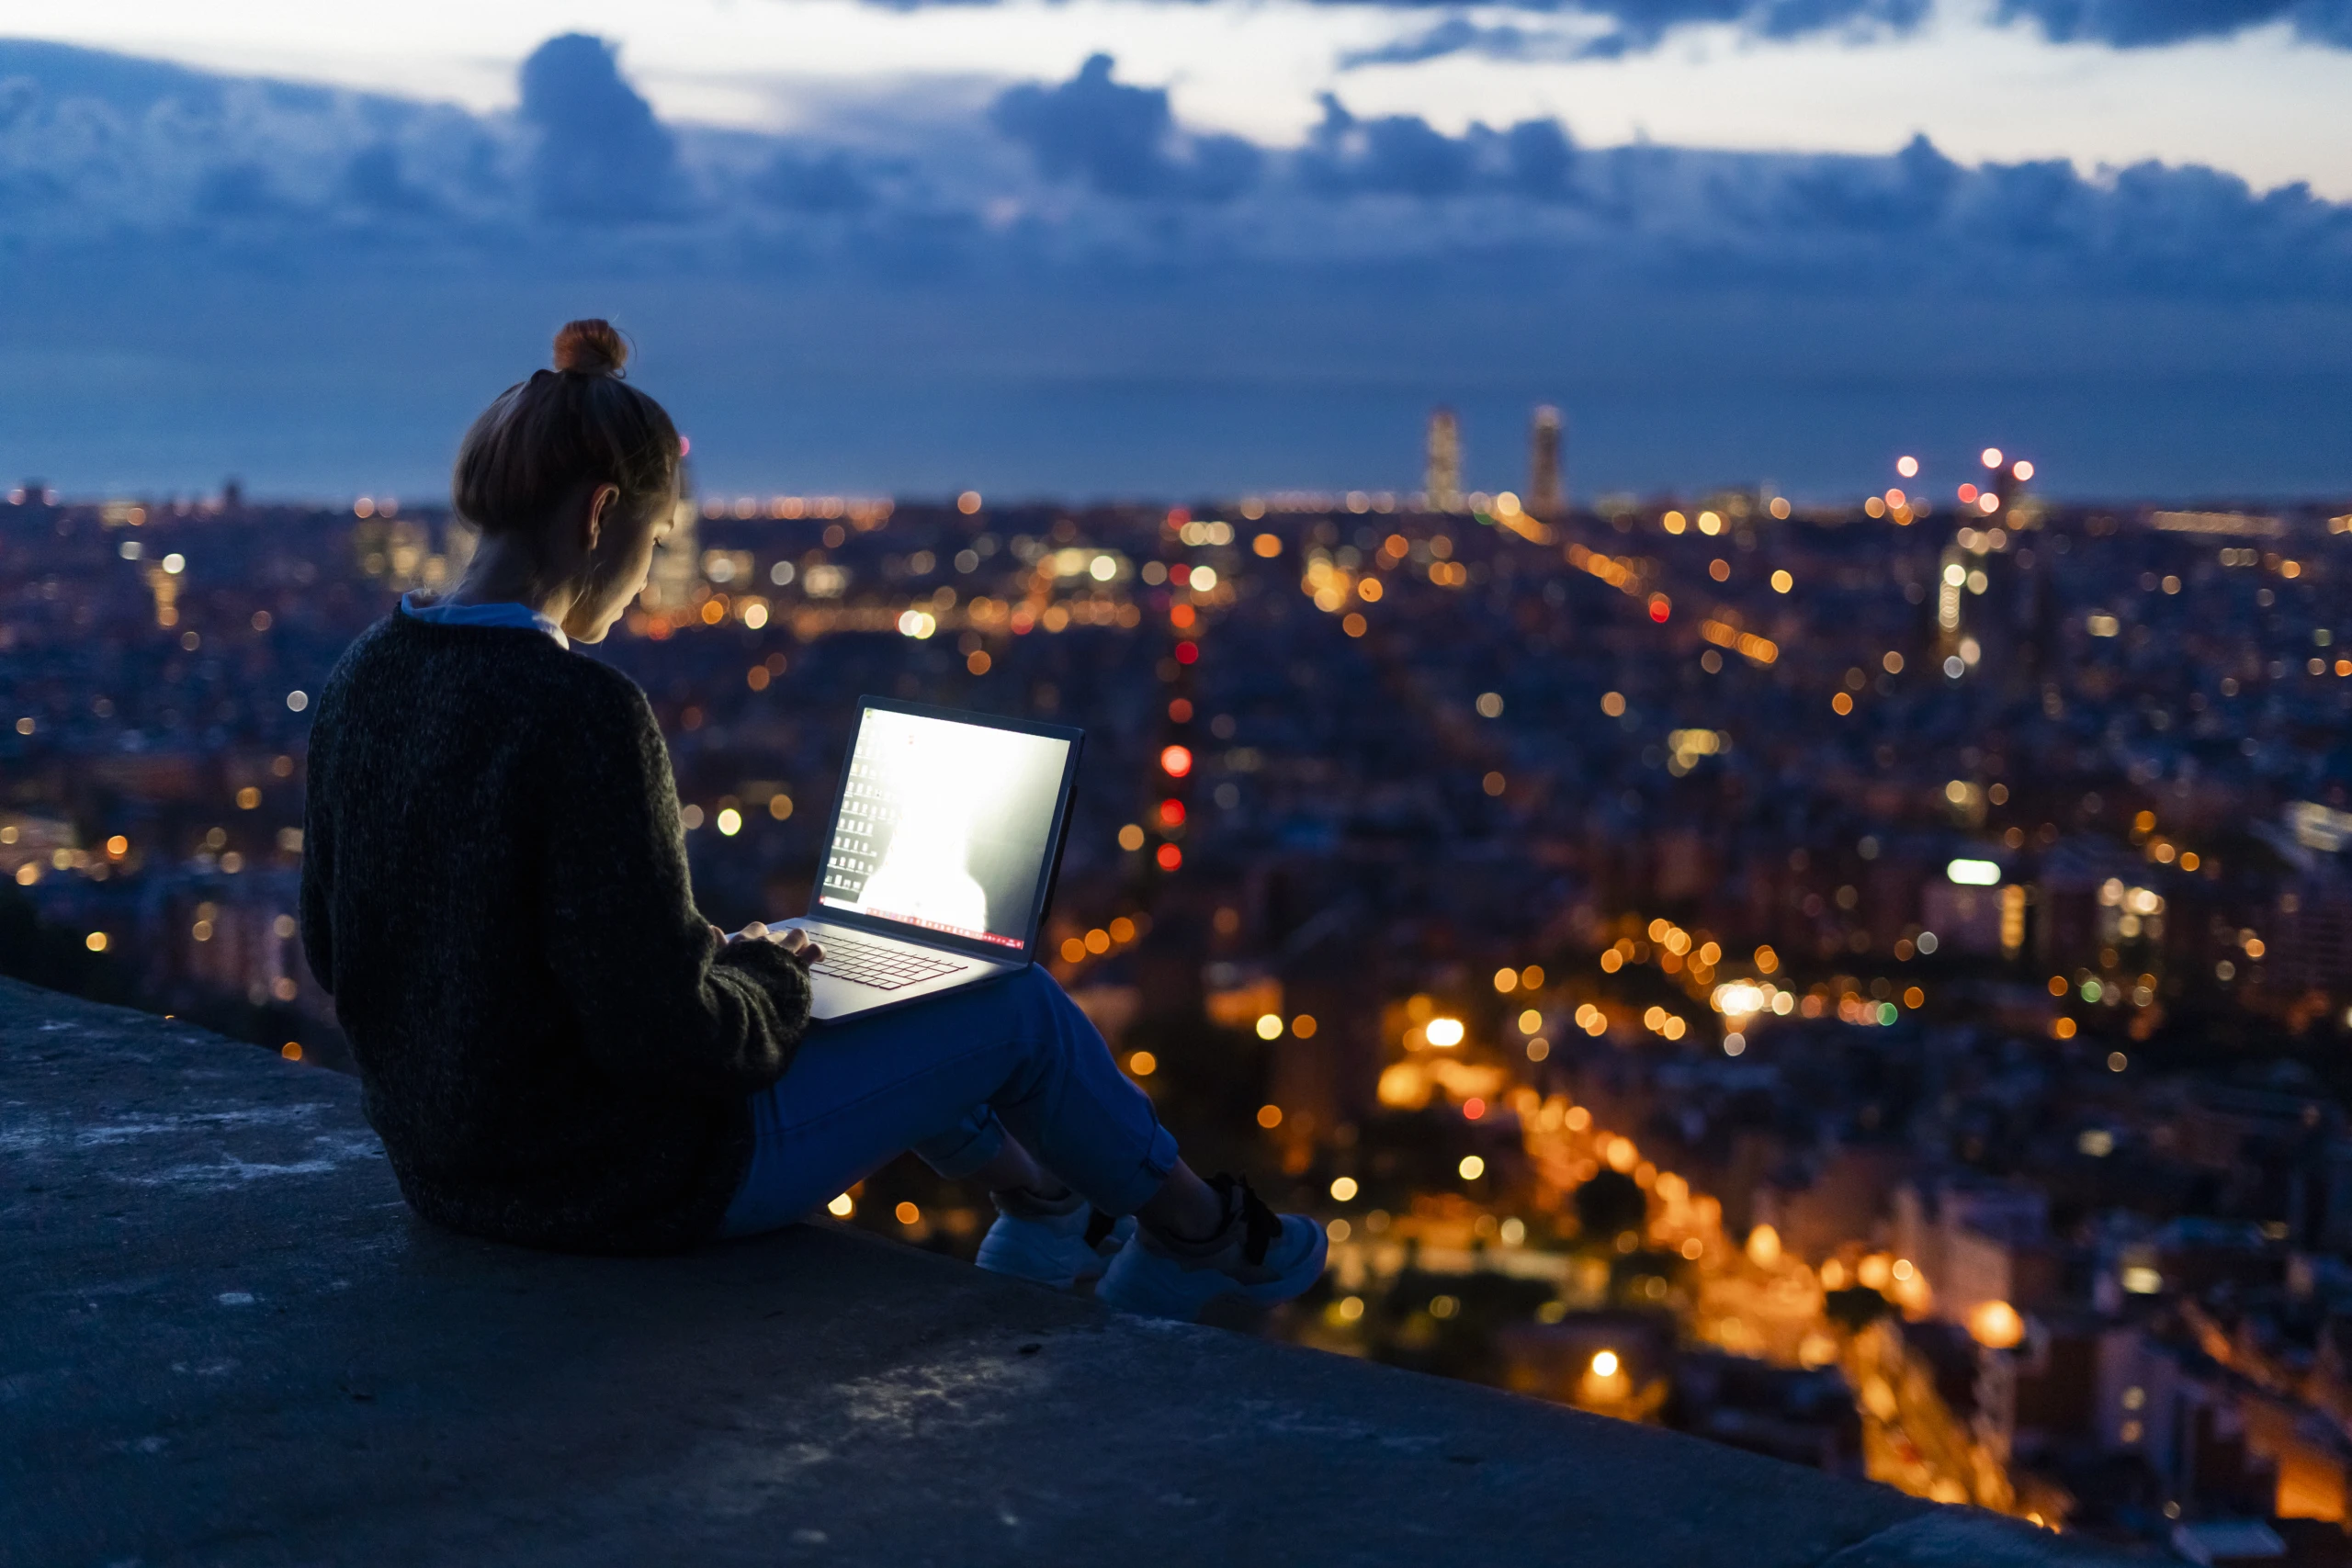 Young woman using laptop at dawn above the city, Barcelona, Spain